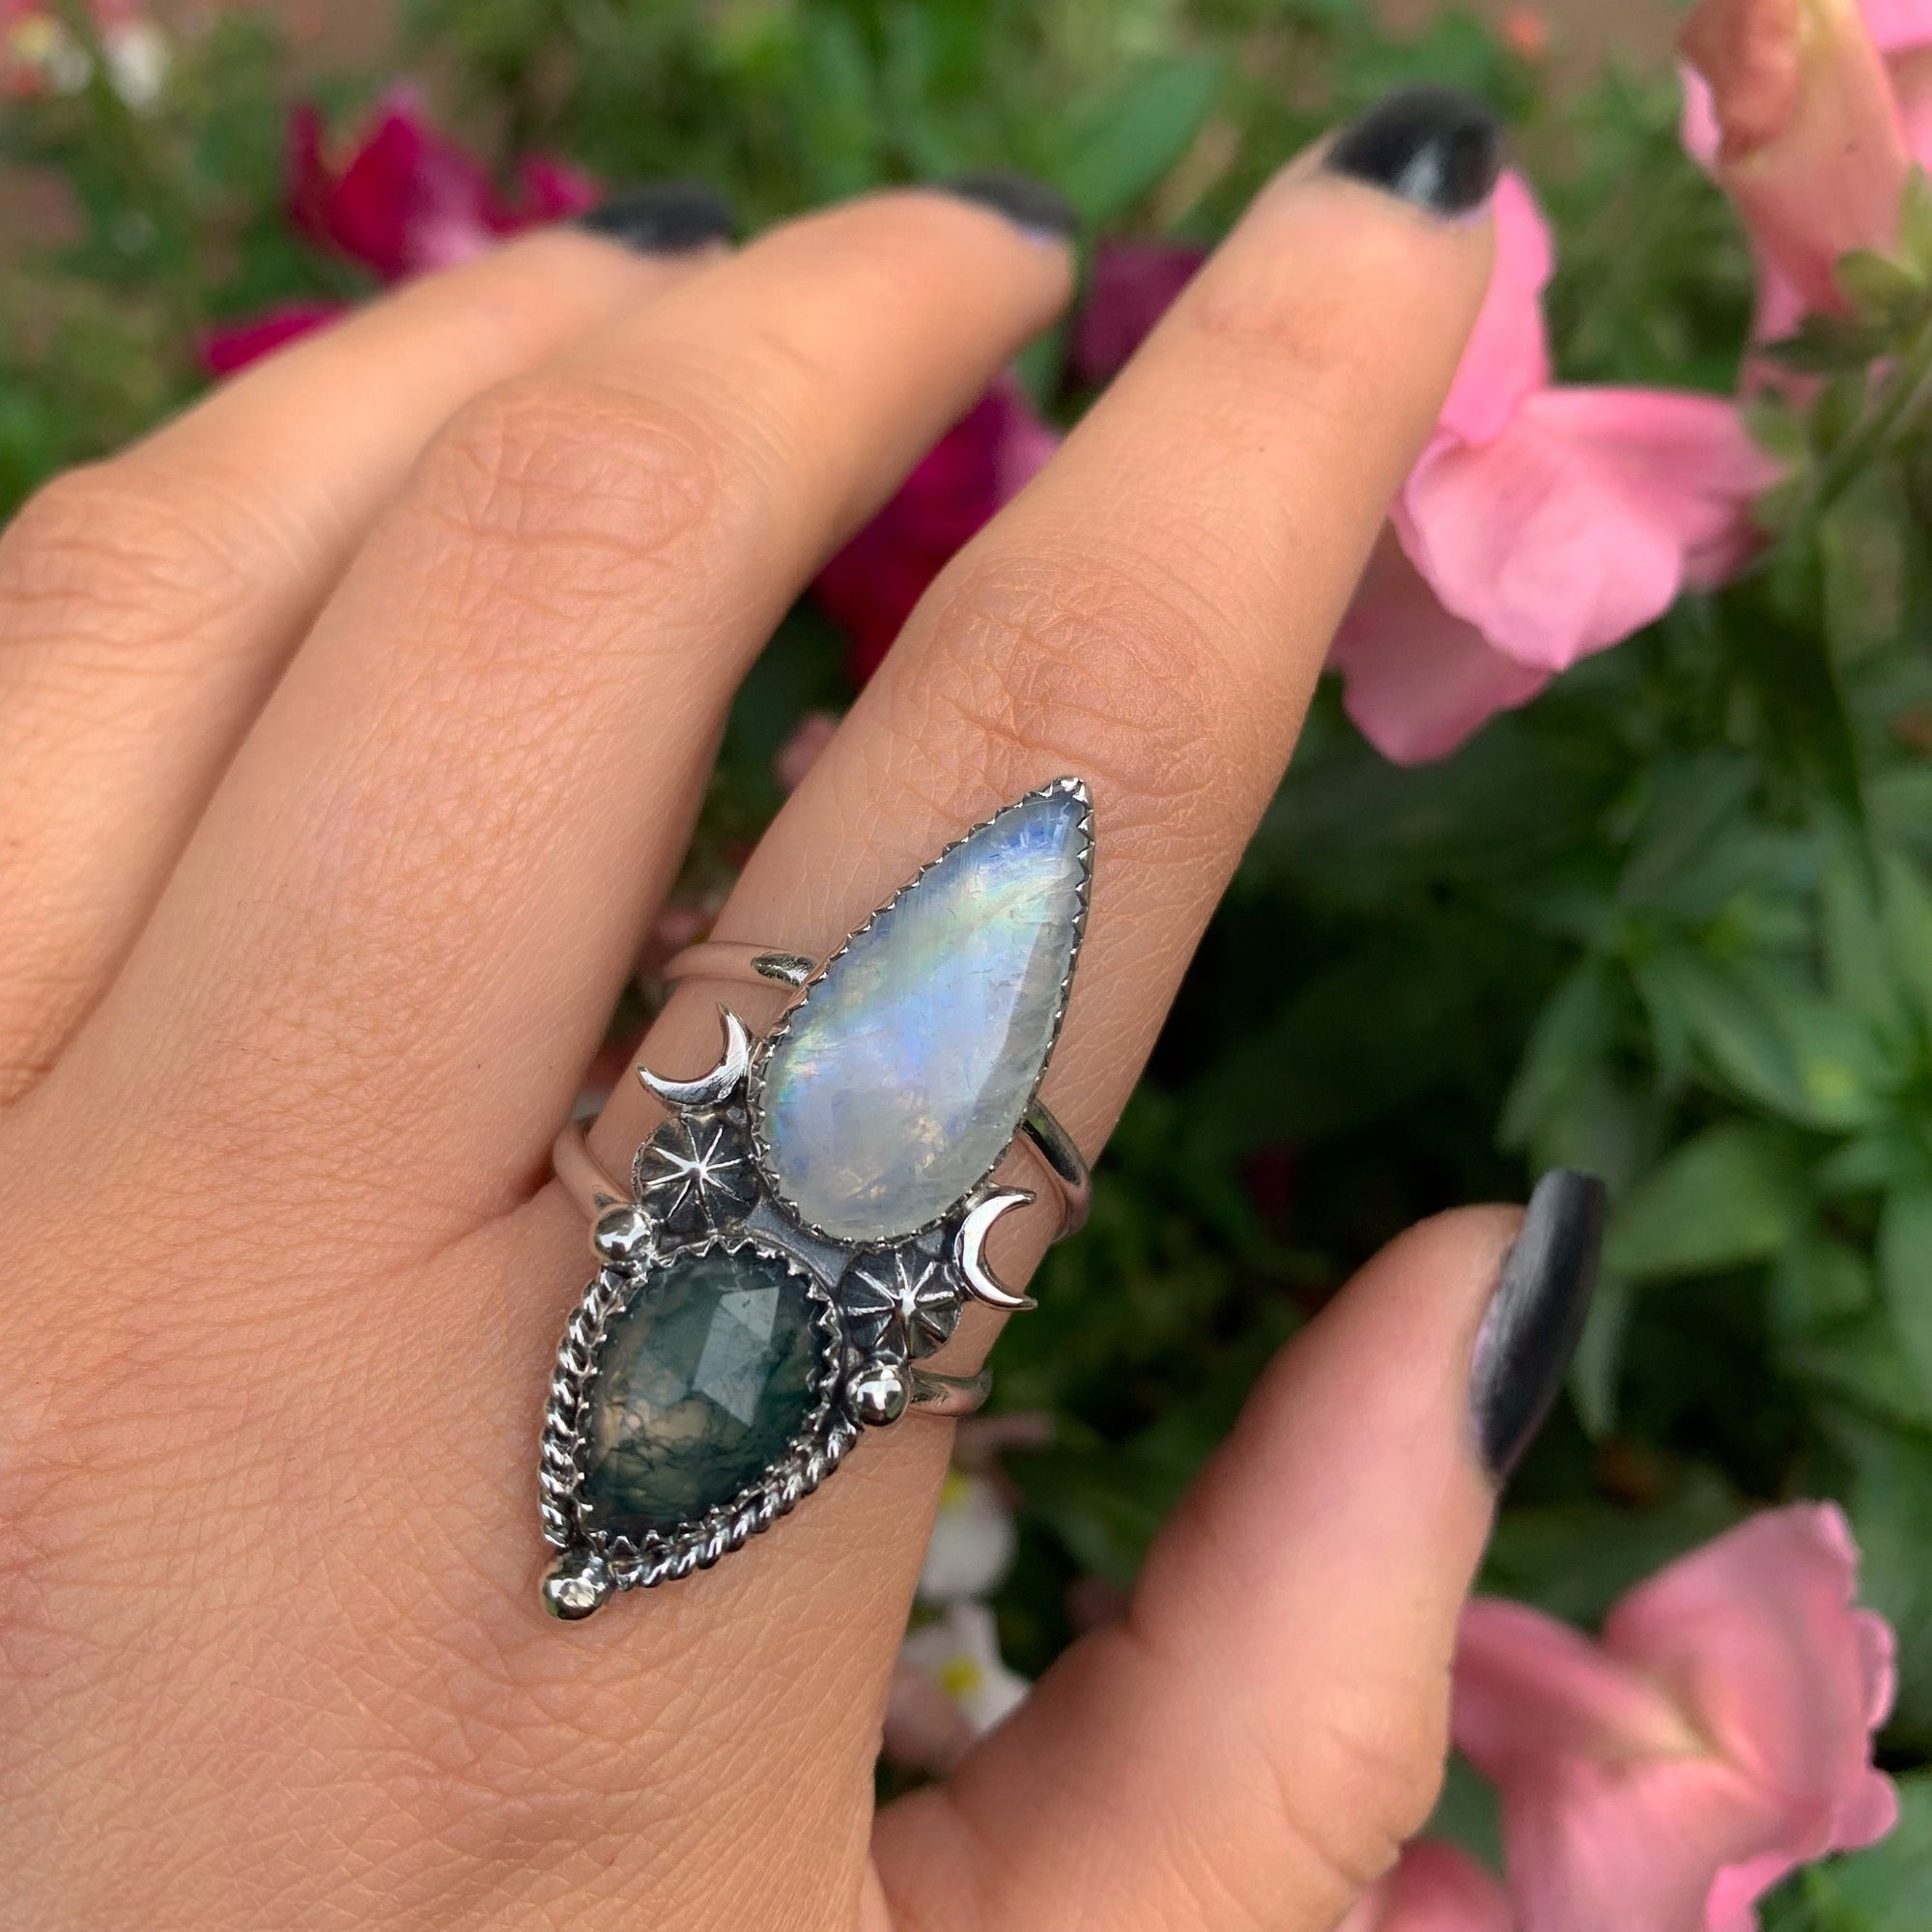 Moonstone & Moss Agate Ring - Size 10 to 10 1/4 